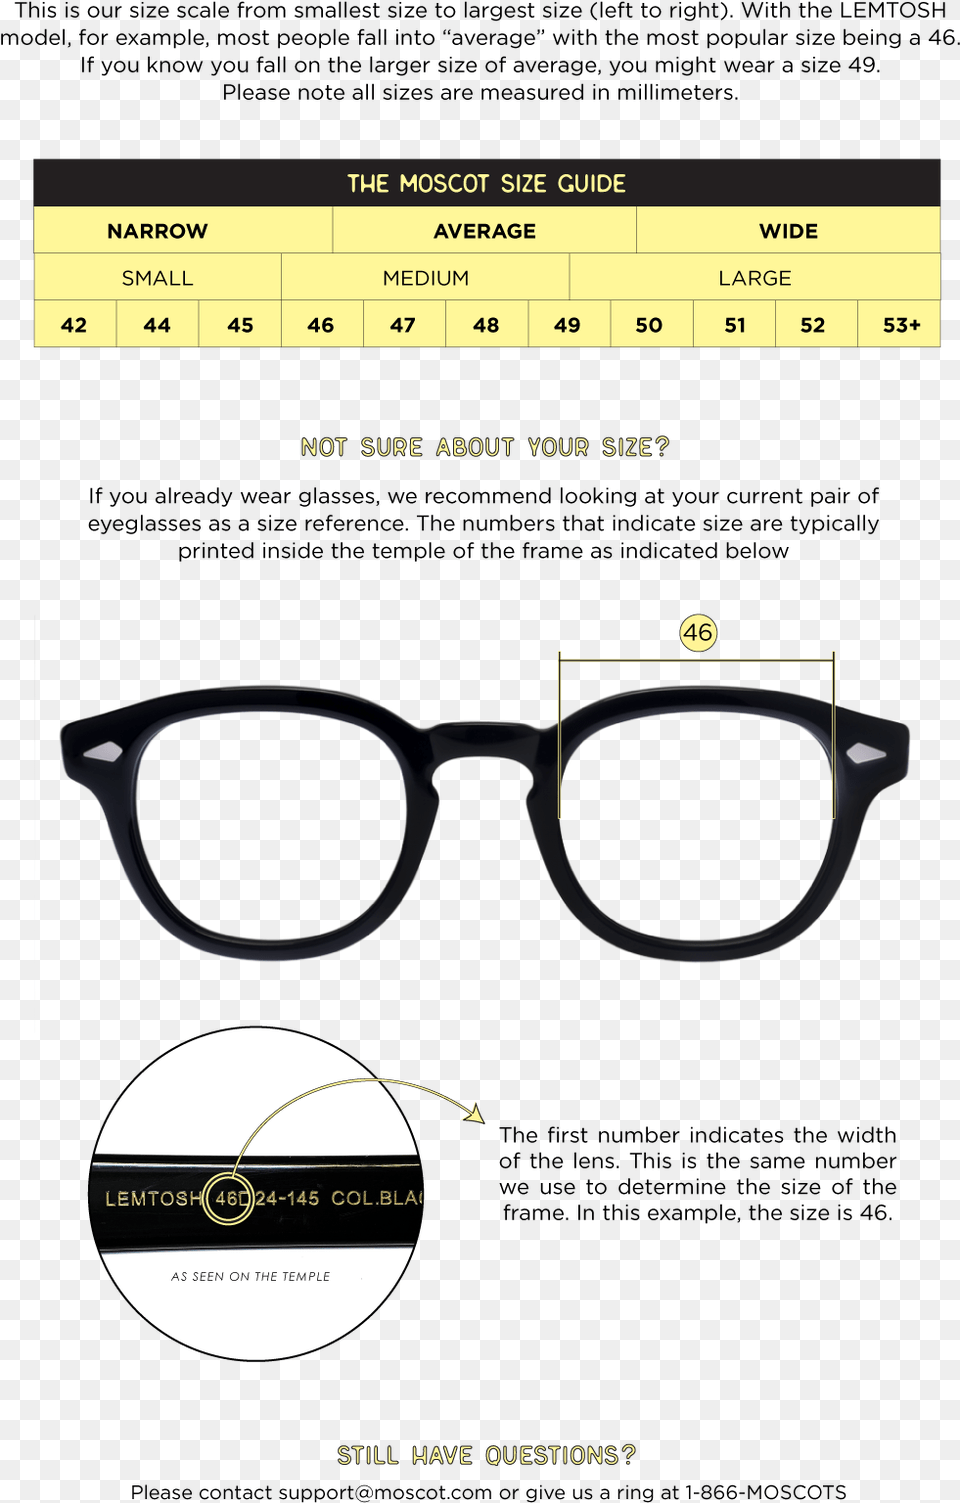 Moscot Lemtosh Size Chart Download Moscot Lemtosh Size Chart, Accessories, Glasses, Plot Png